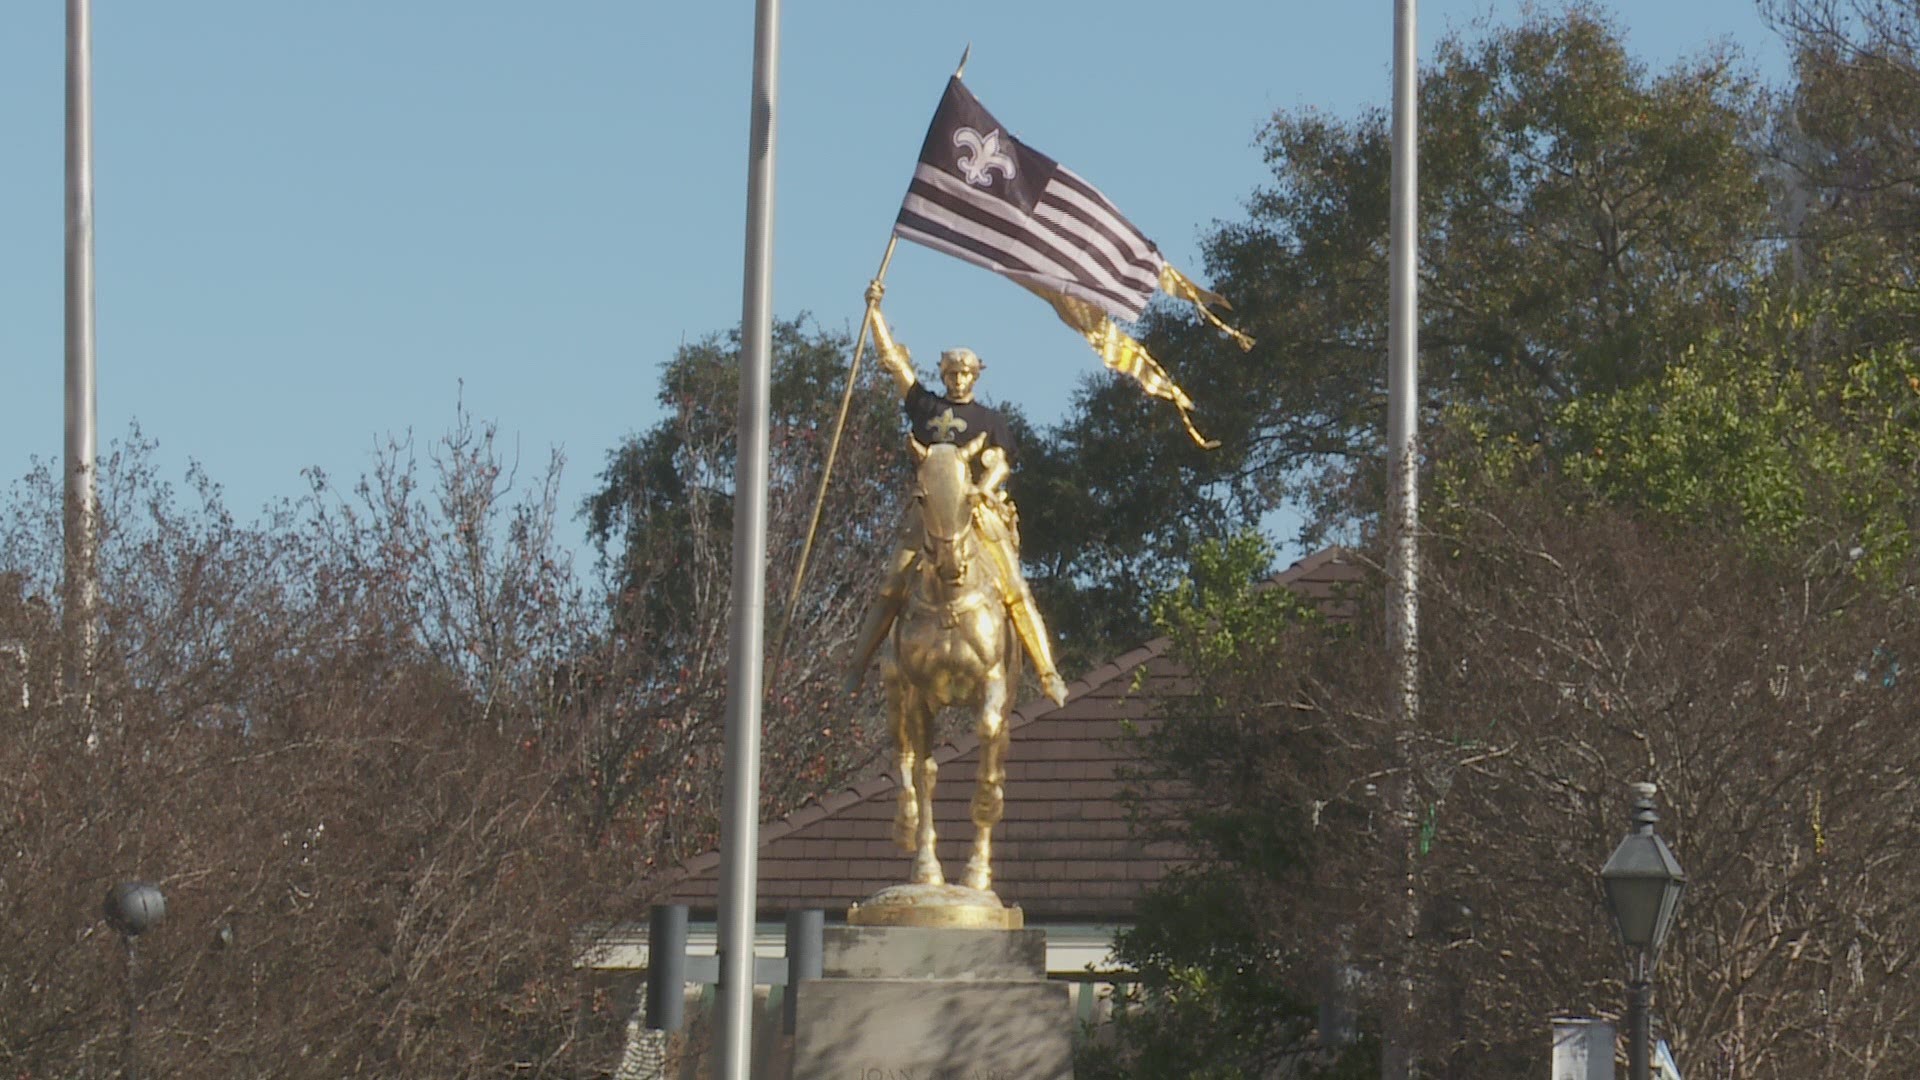 Everyone in the city is a New Orleans Saints fan - including the Maid of Orleans.